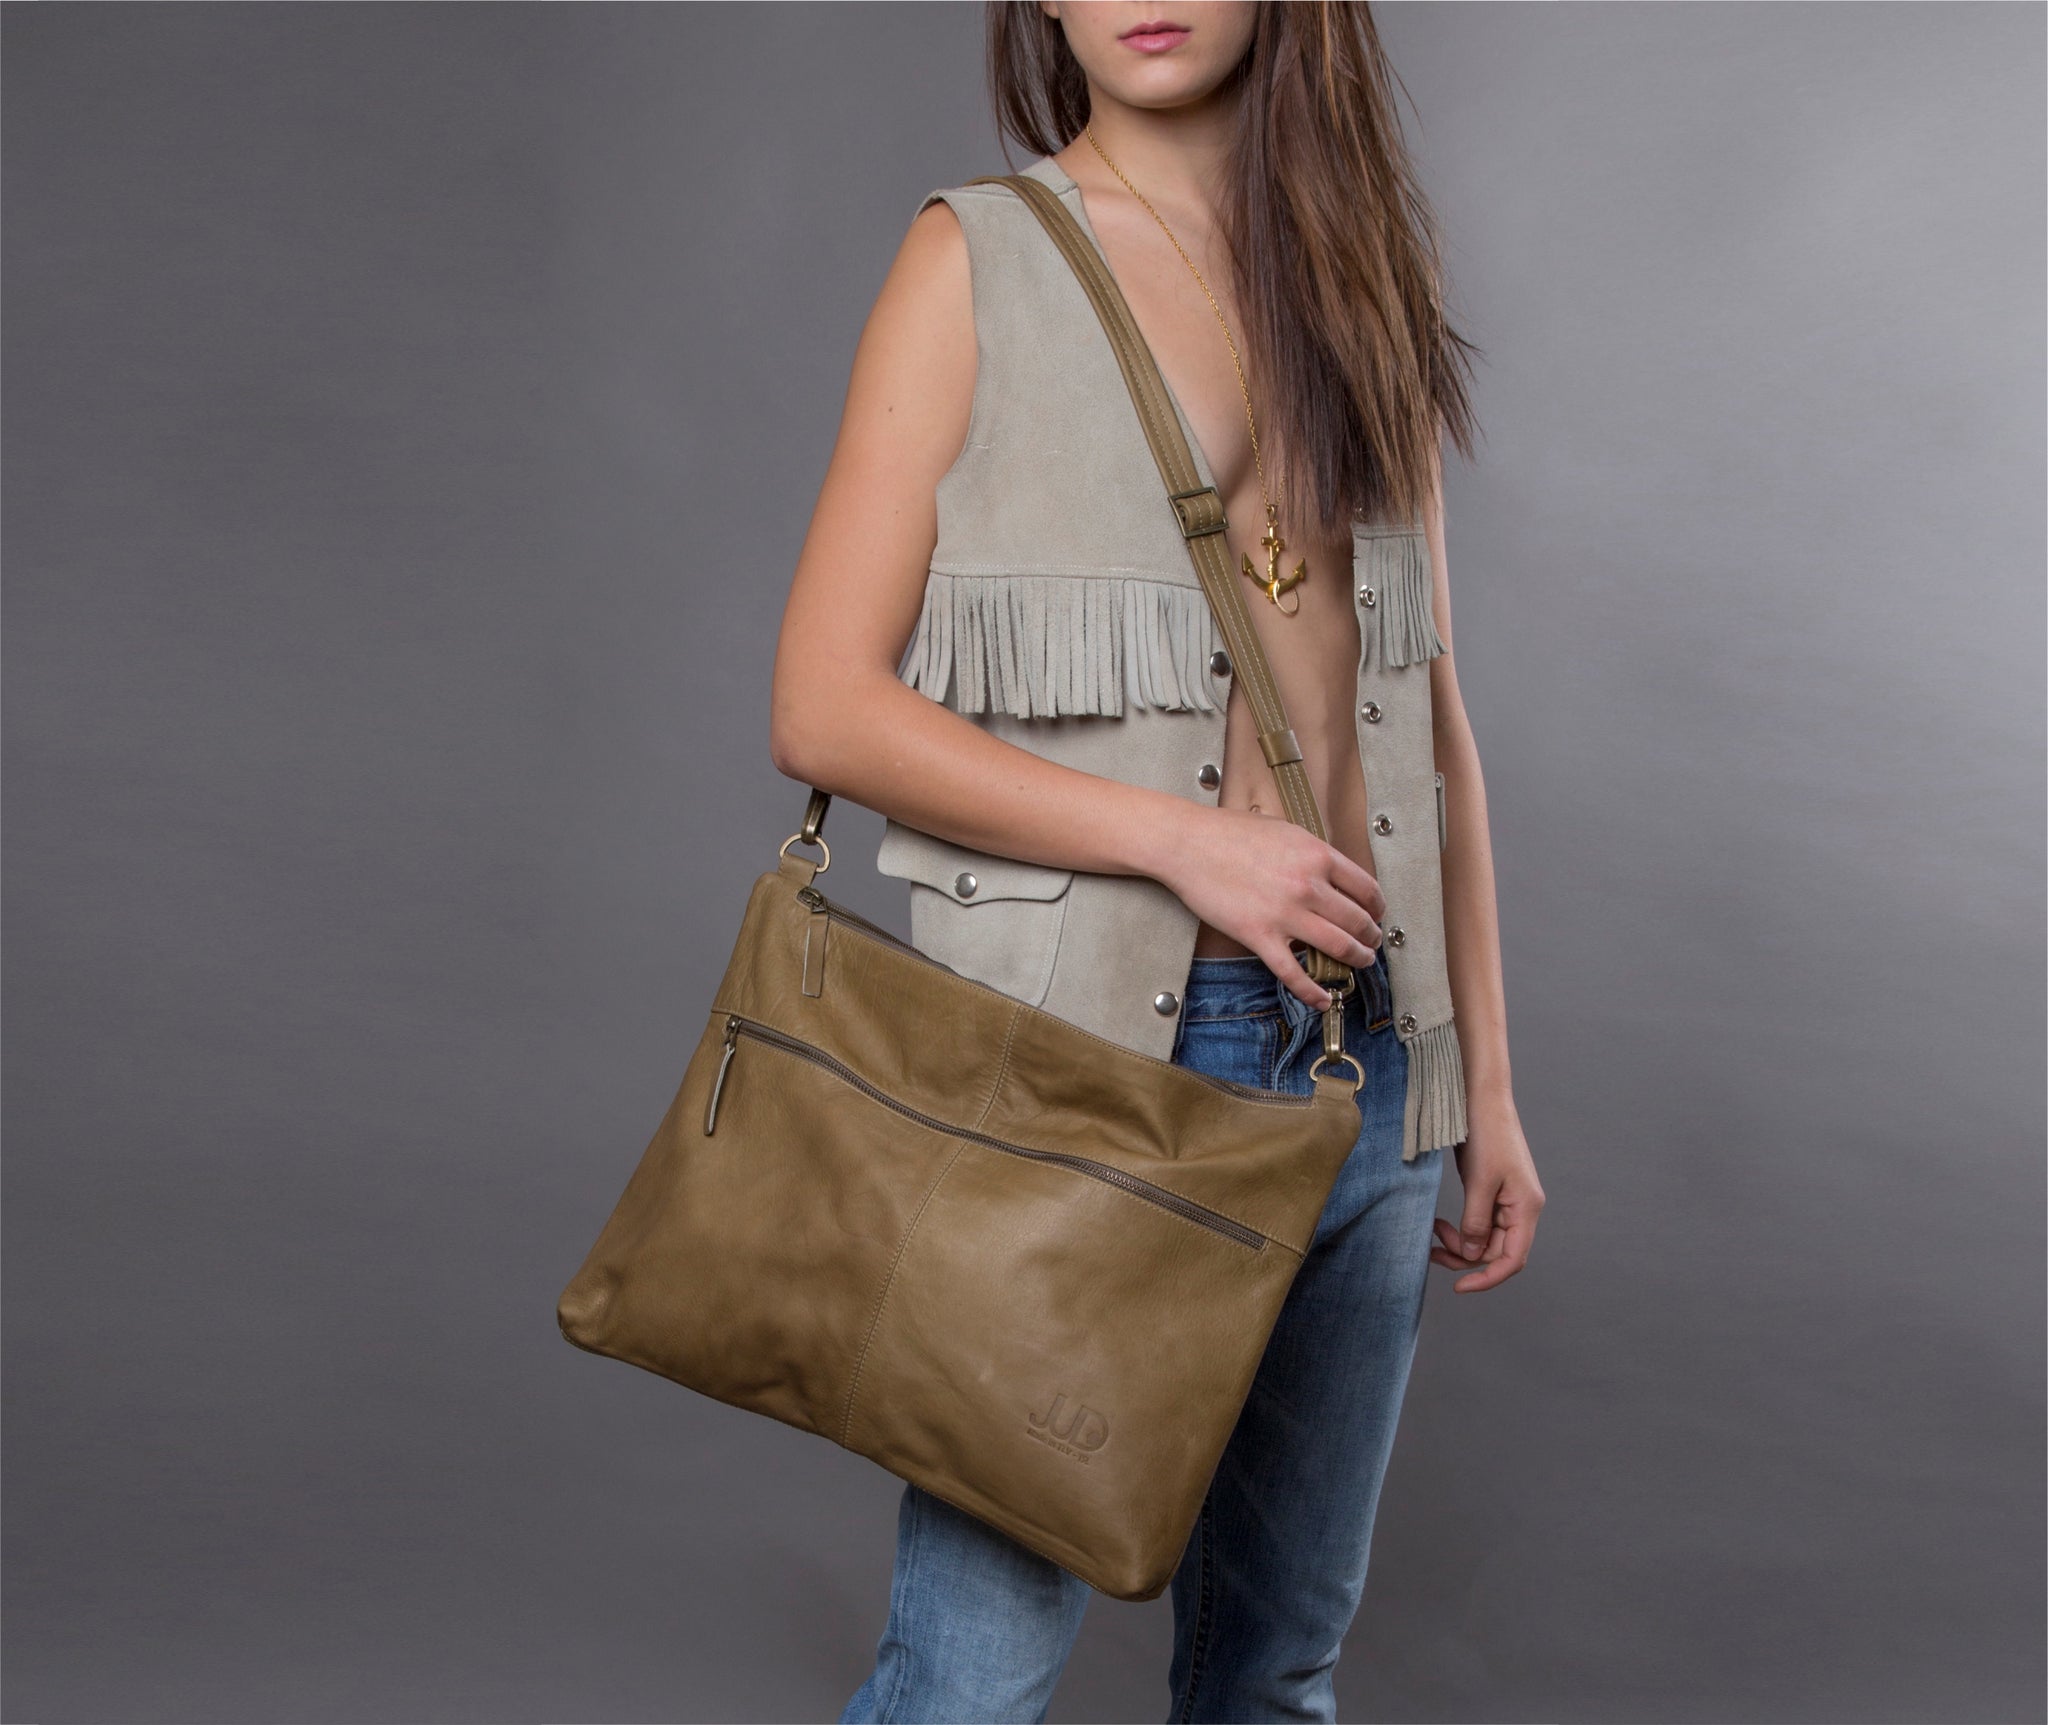 Olive green designer messenger bag handmade with soft Italian Napa leather suitable for laptops up to 17in with adjustable & detachable matching leather strap can be carries as a crossbody bag, shoulder bag, oversized clutch